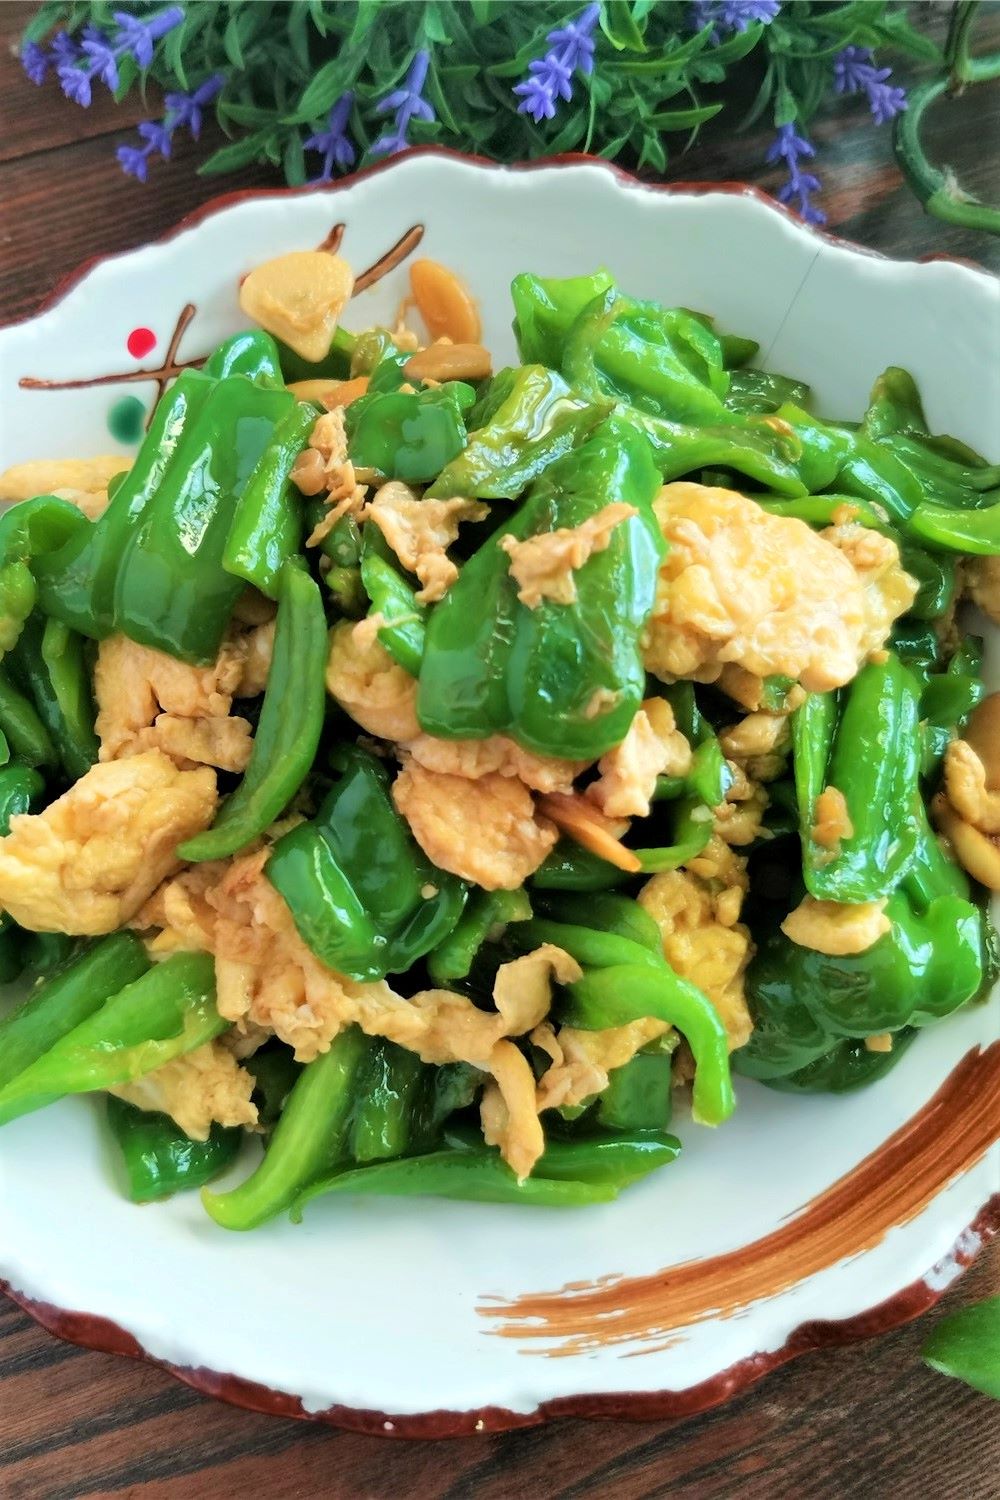 Scrambled eggs with green peppers best china food 